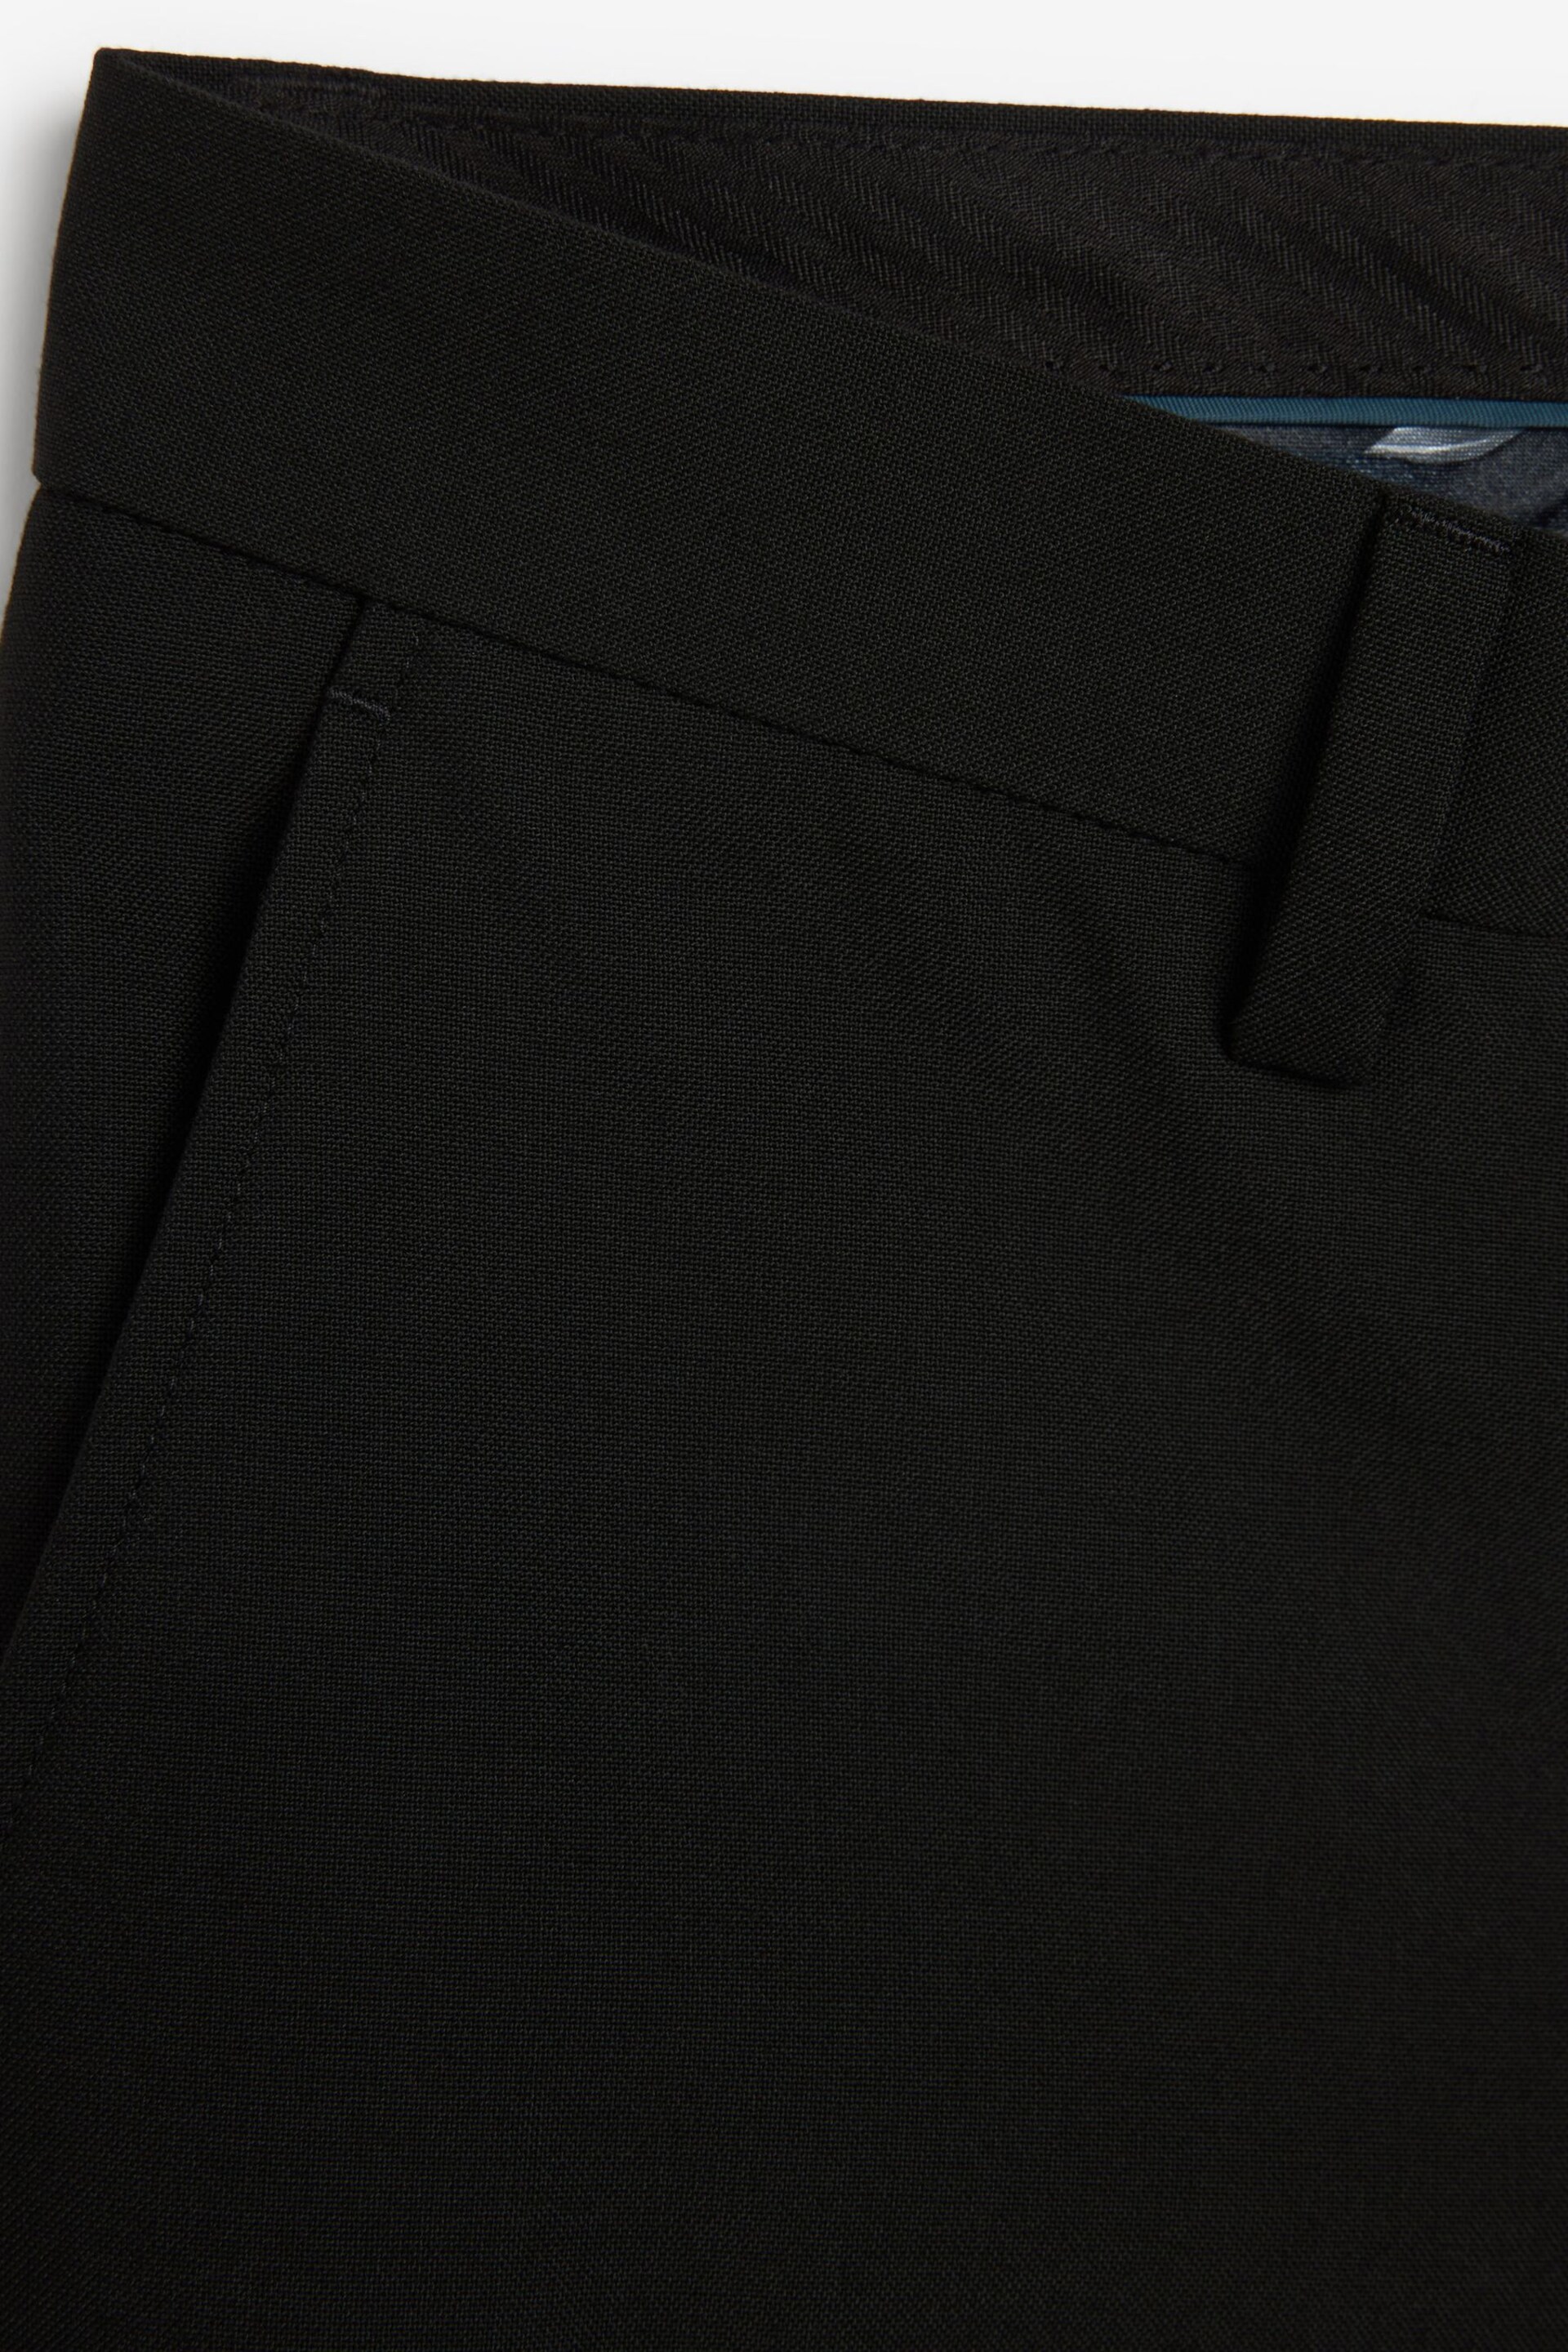 Black Tailored Suit Trousers - Image 7 of 8